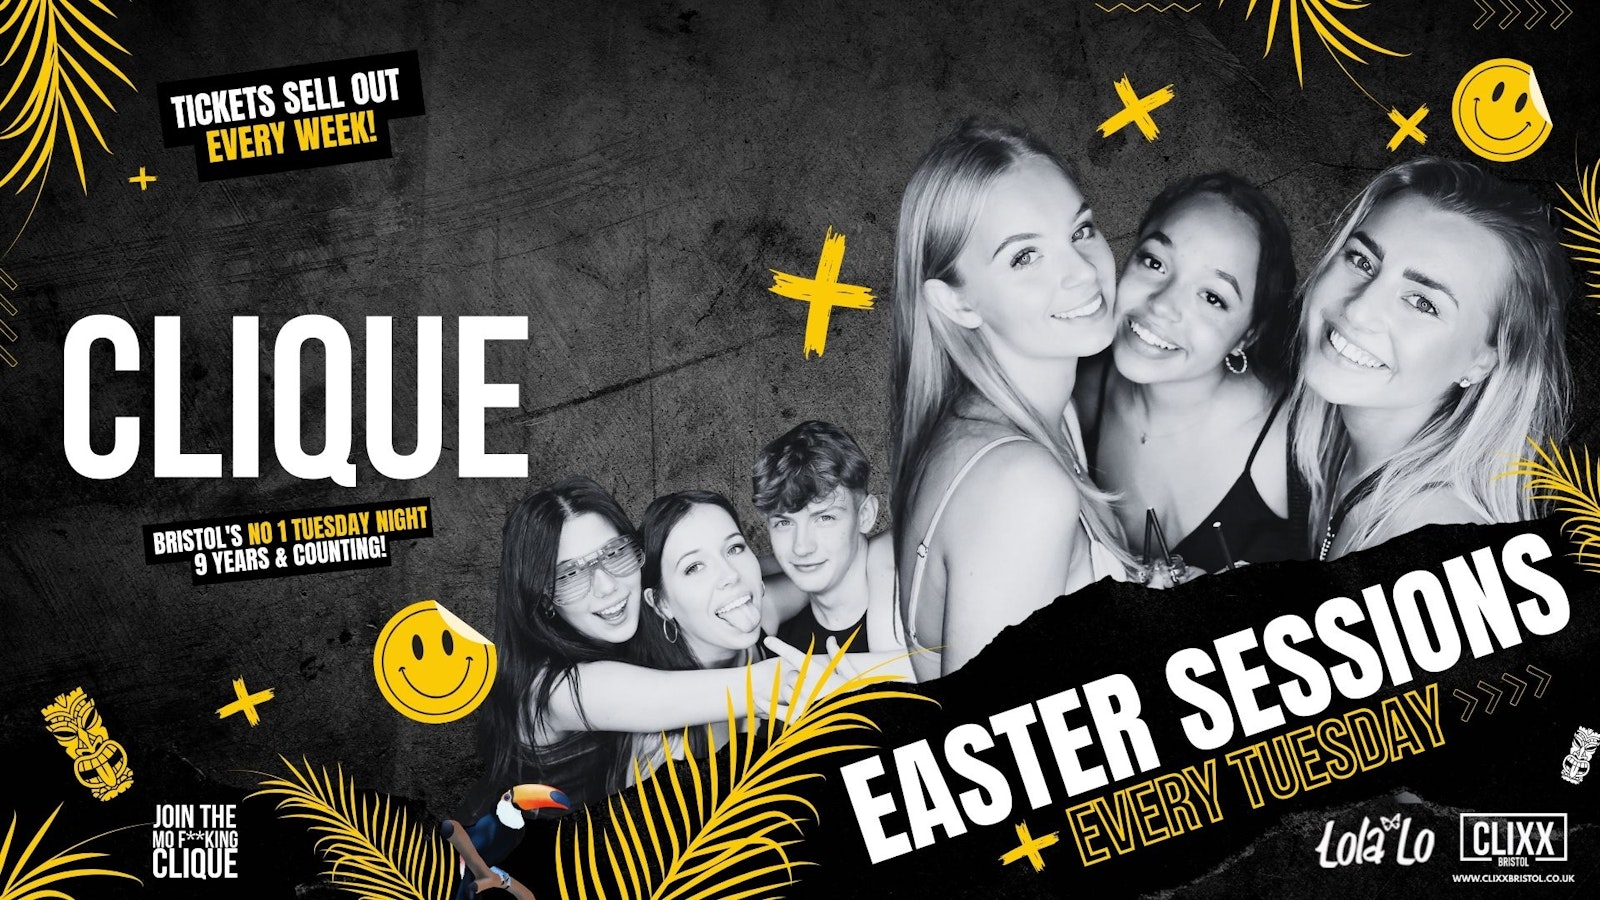 CLIQUE | Easter Sessions 🔥 Join The Mo F**king Clique